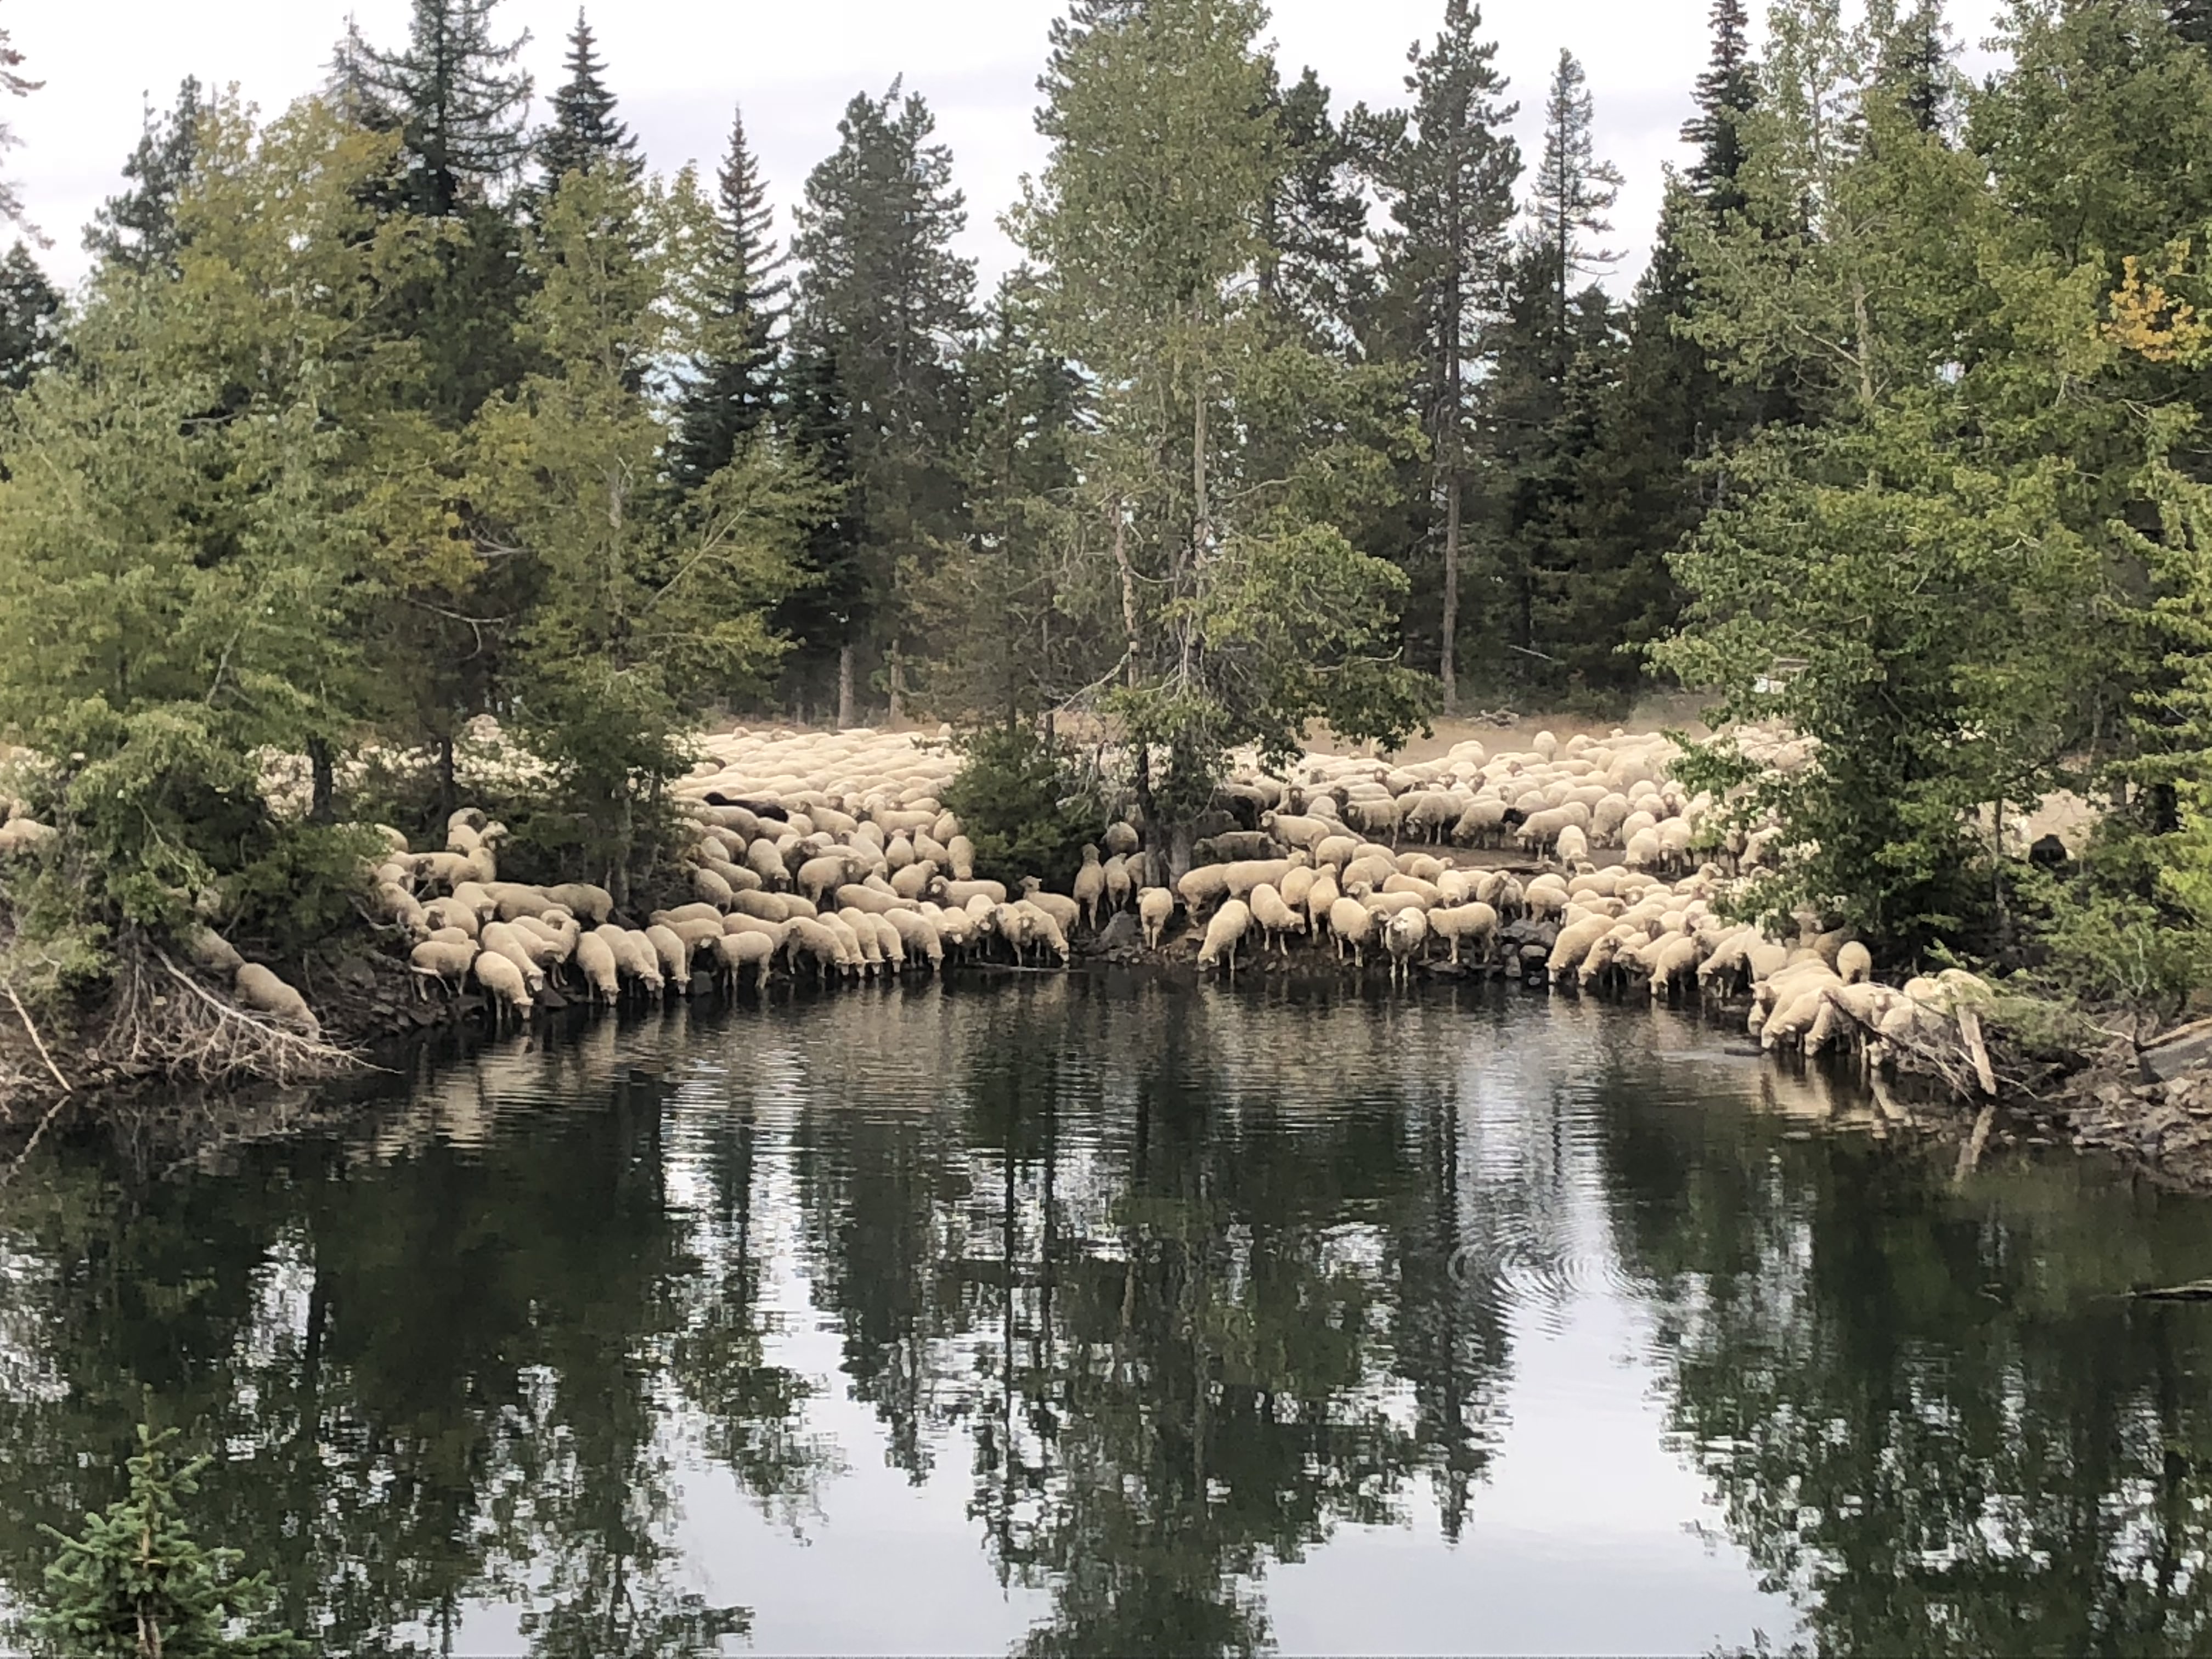 A band of sheep drink out of a water hole